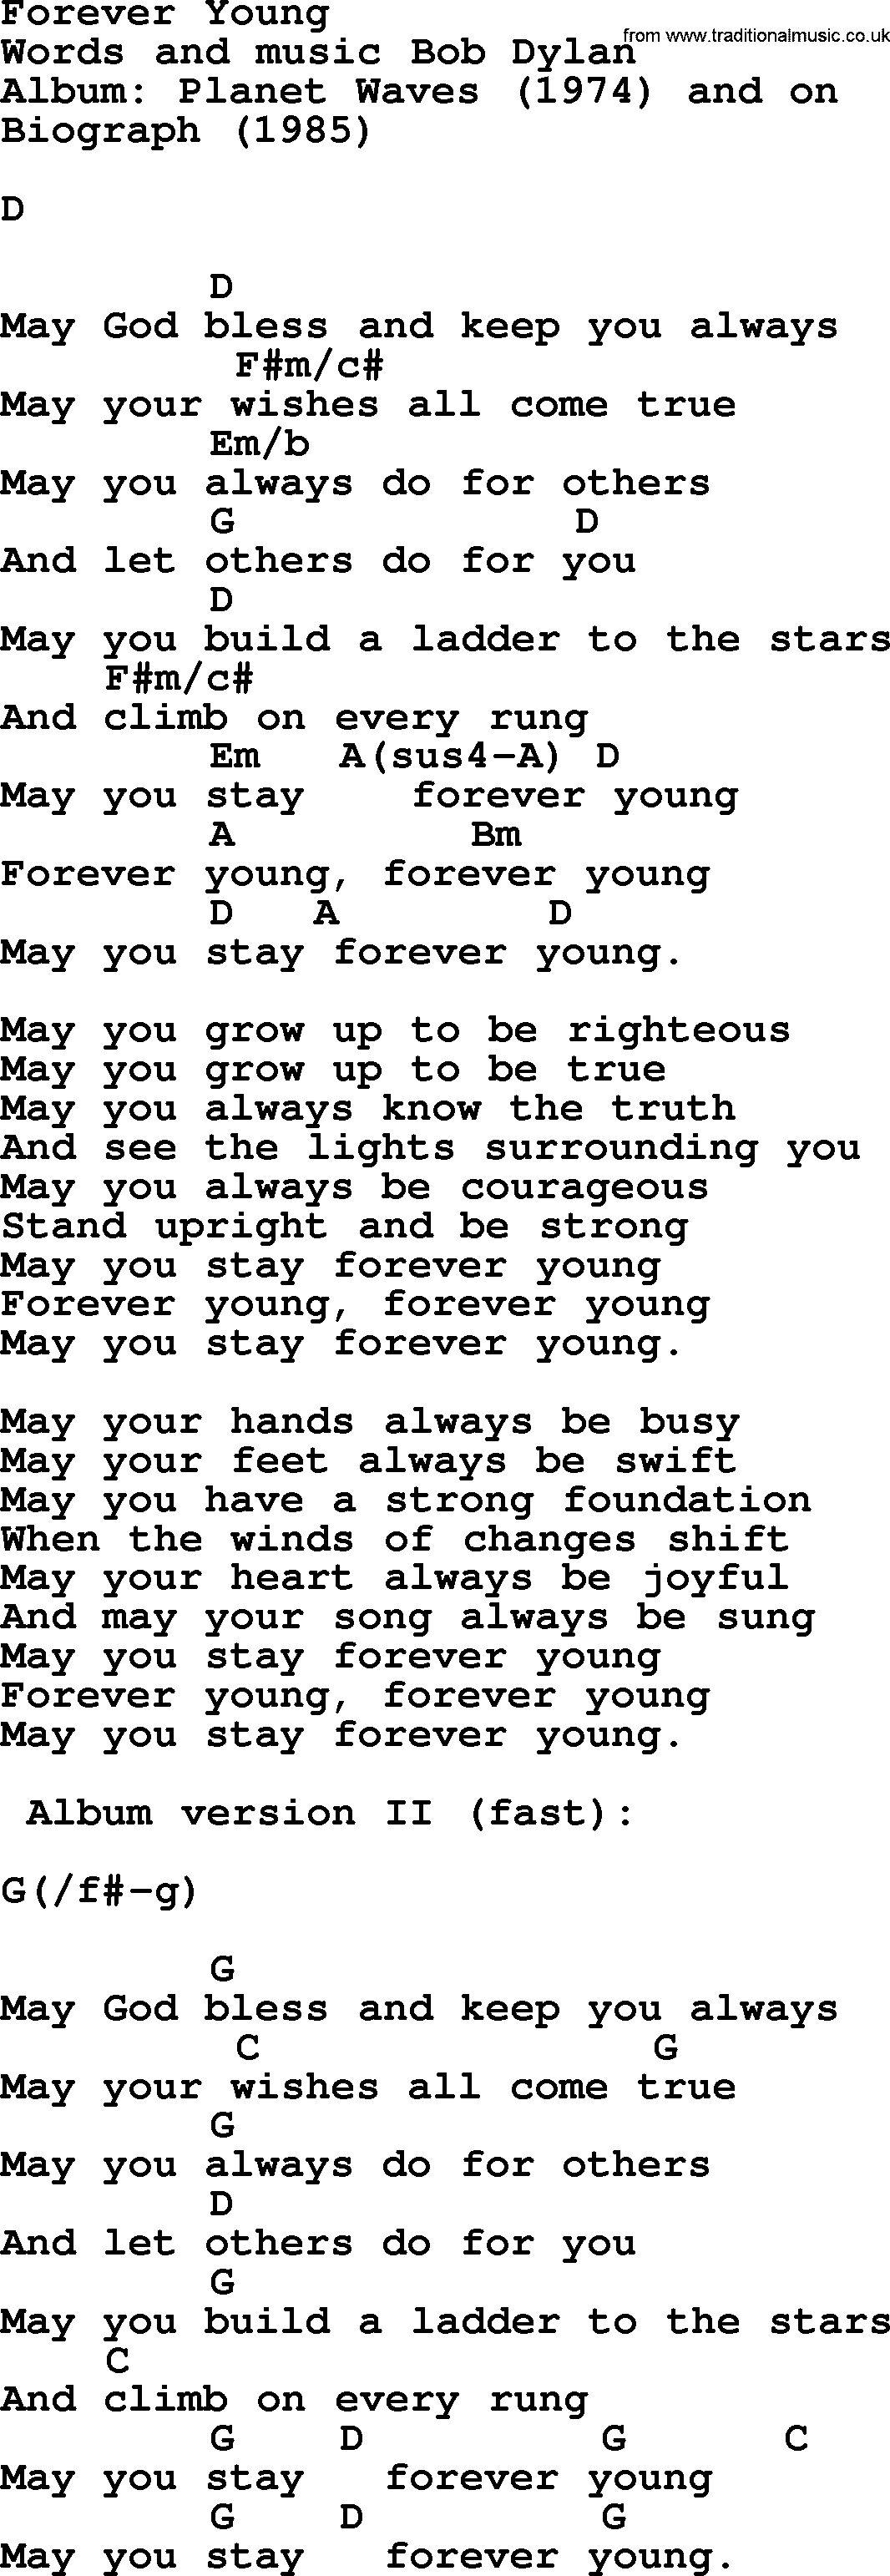 Bob Dylan Song Forever Young Lyrics And Chords